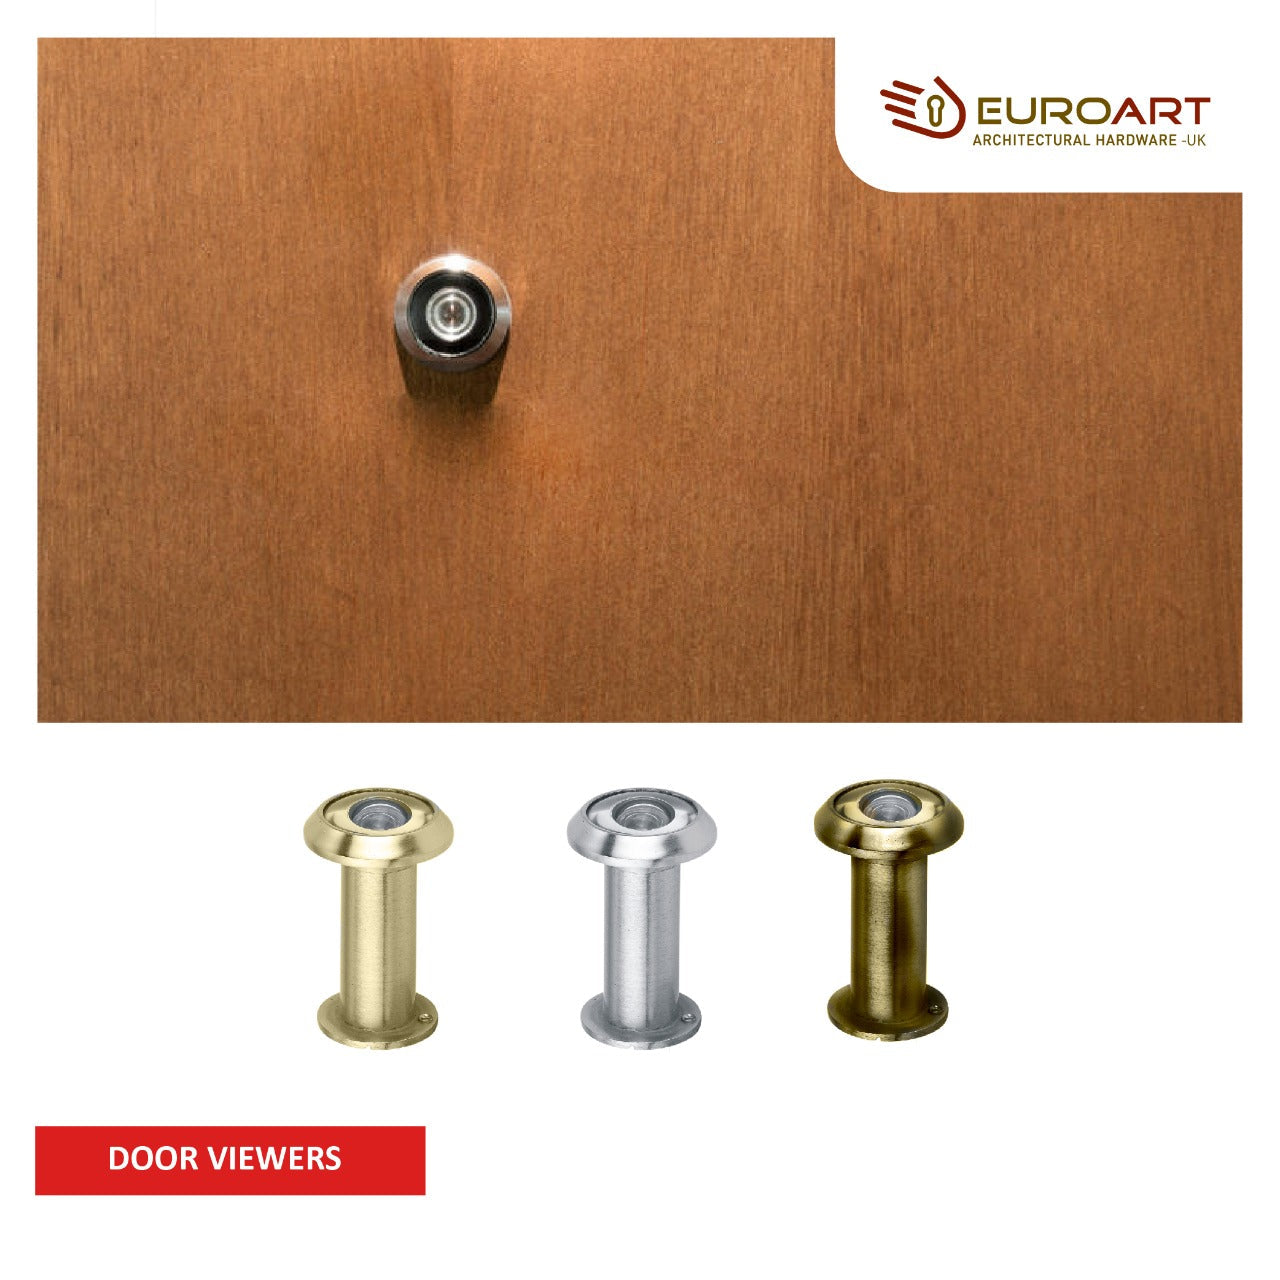 EuroArt door viewers by M. M. Noorbhoy & Co - High-quality, secure and durable viewers for clear visibility.